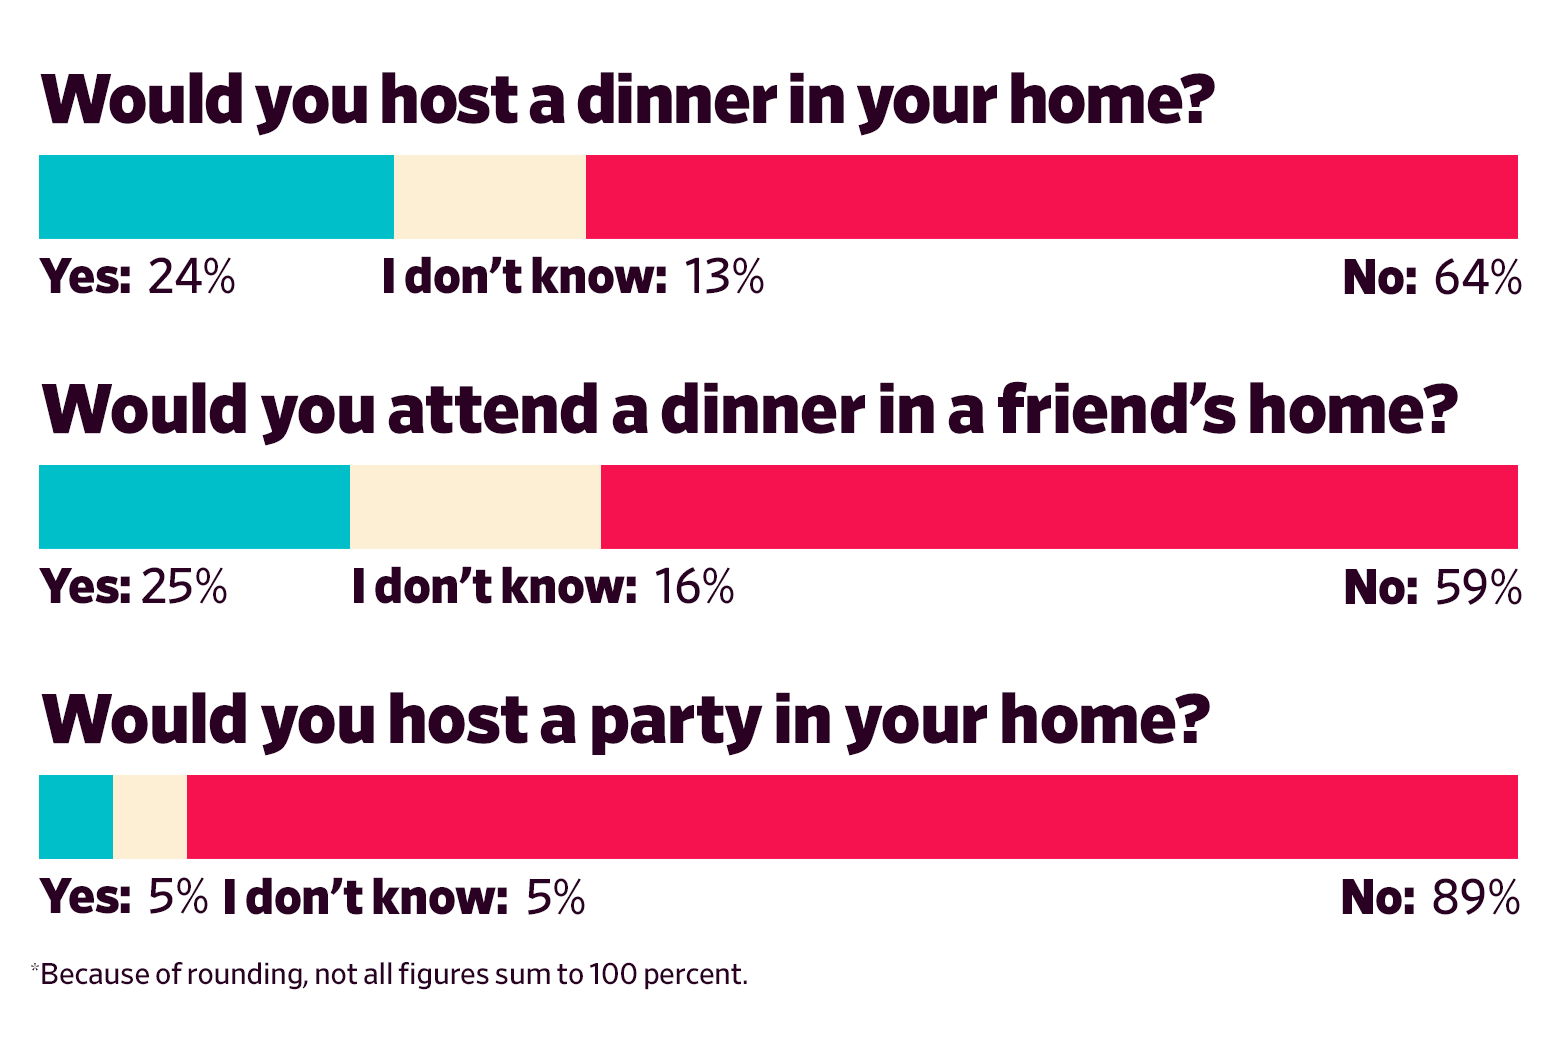 Would you host a dinner in your home? Yes: 24 I don’t know: 13 No: 64